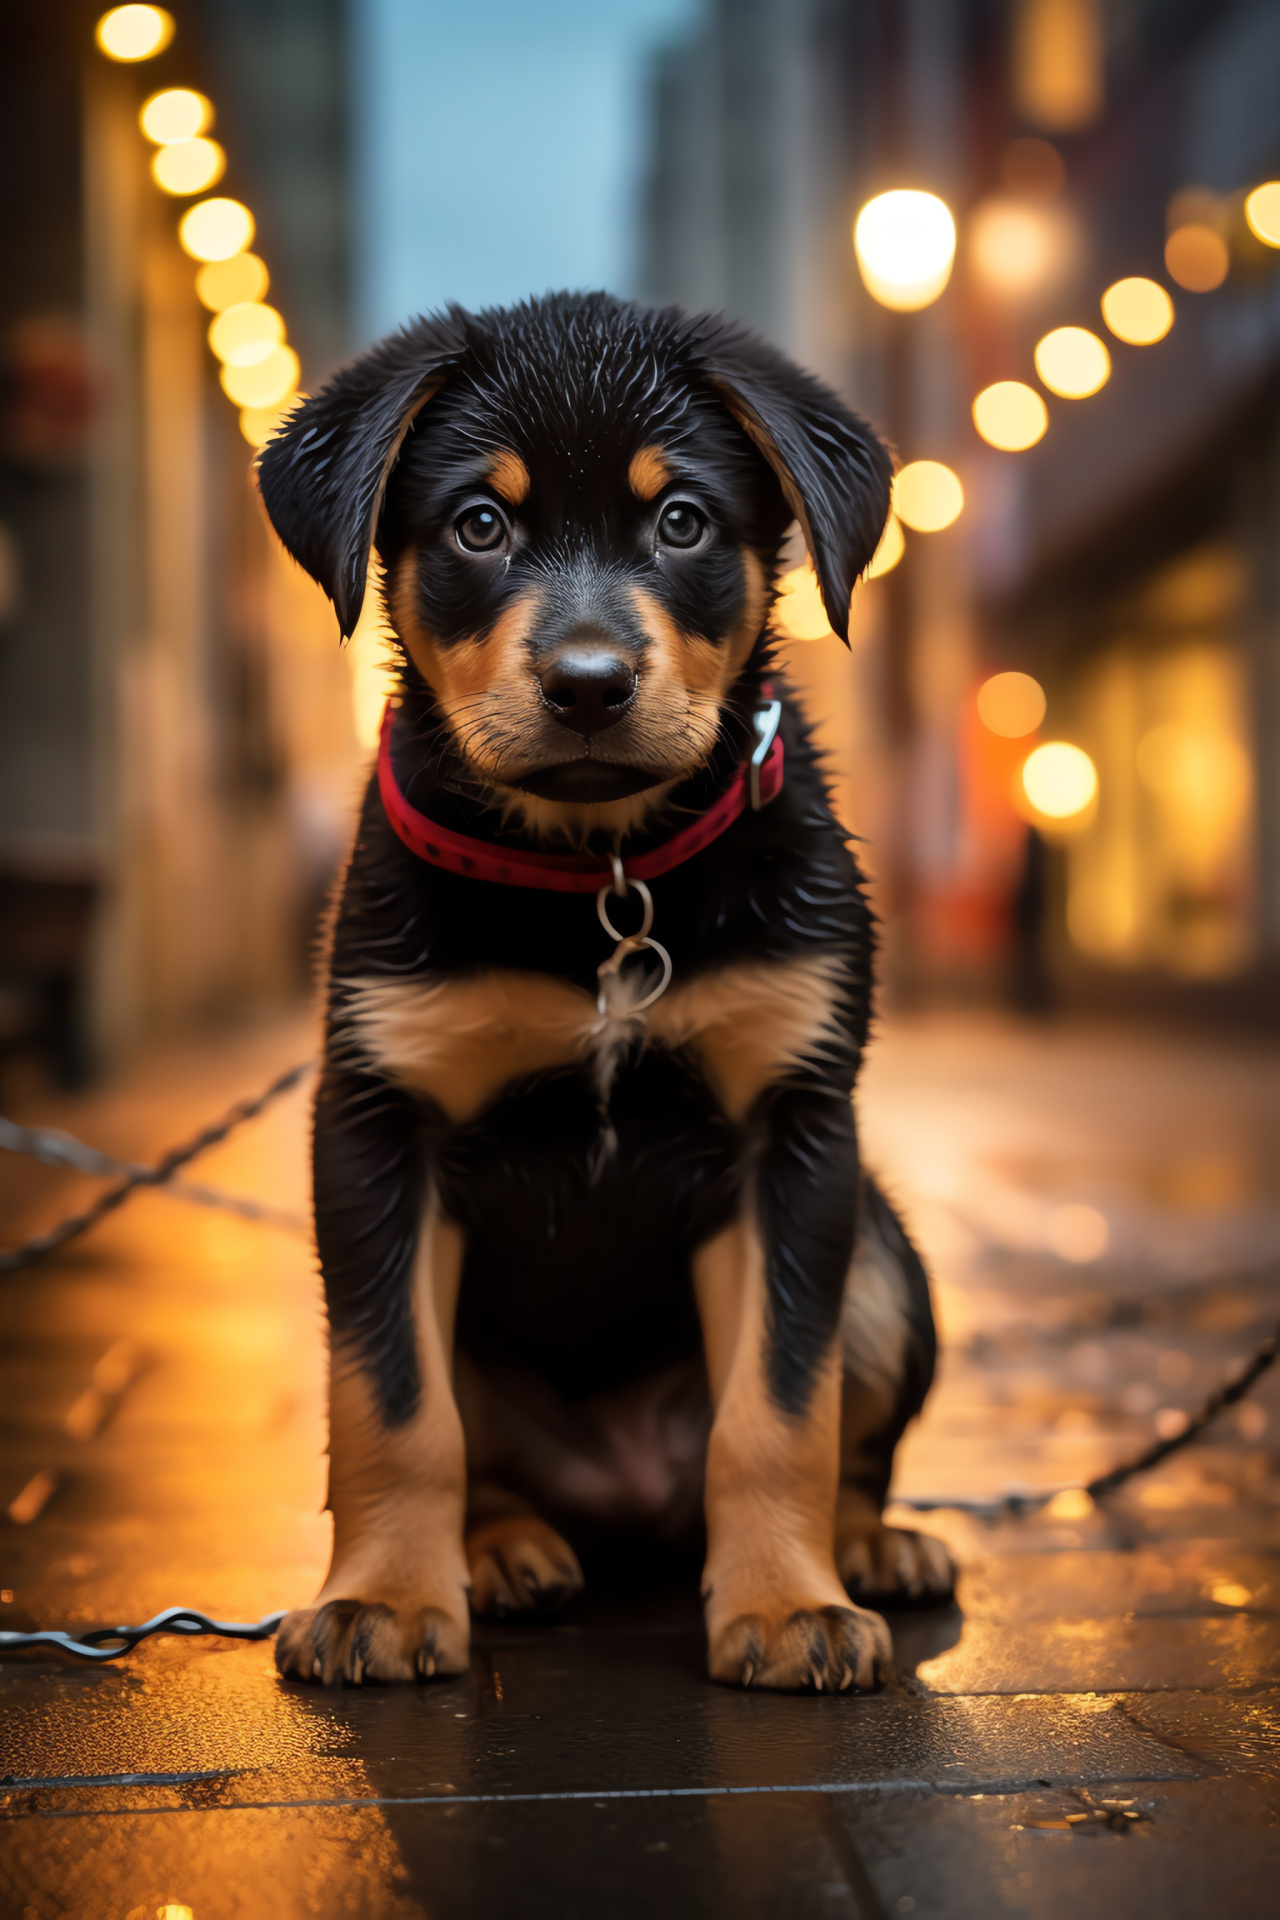 Puppy innocence, Rottweiler youth, glossy coat, signature marking, serene simplicity, HD Phone Image